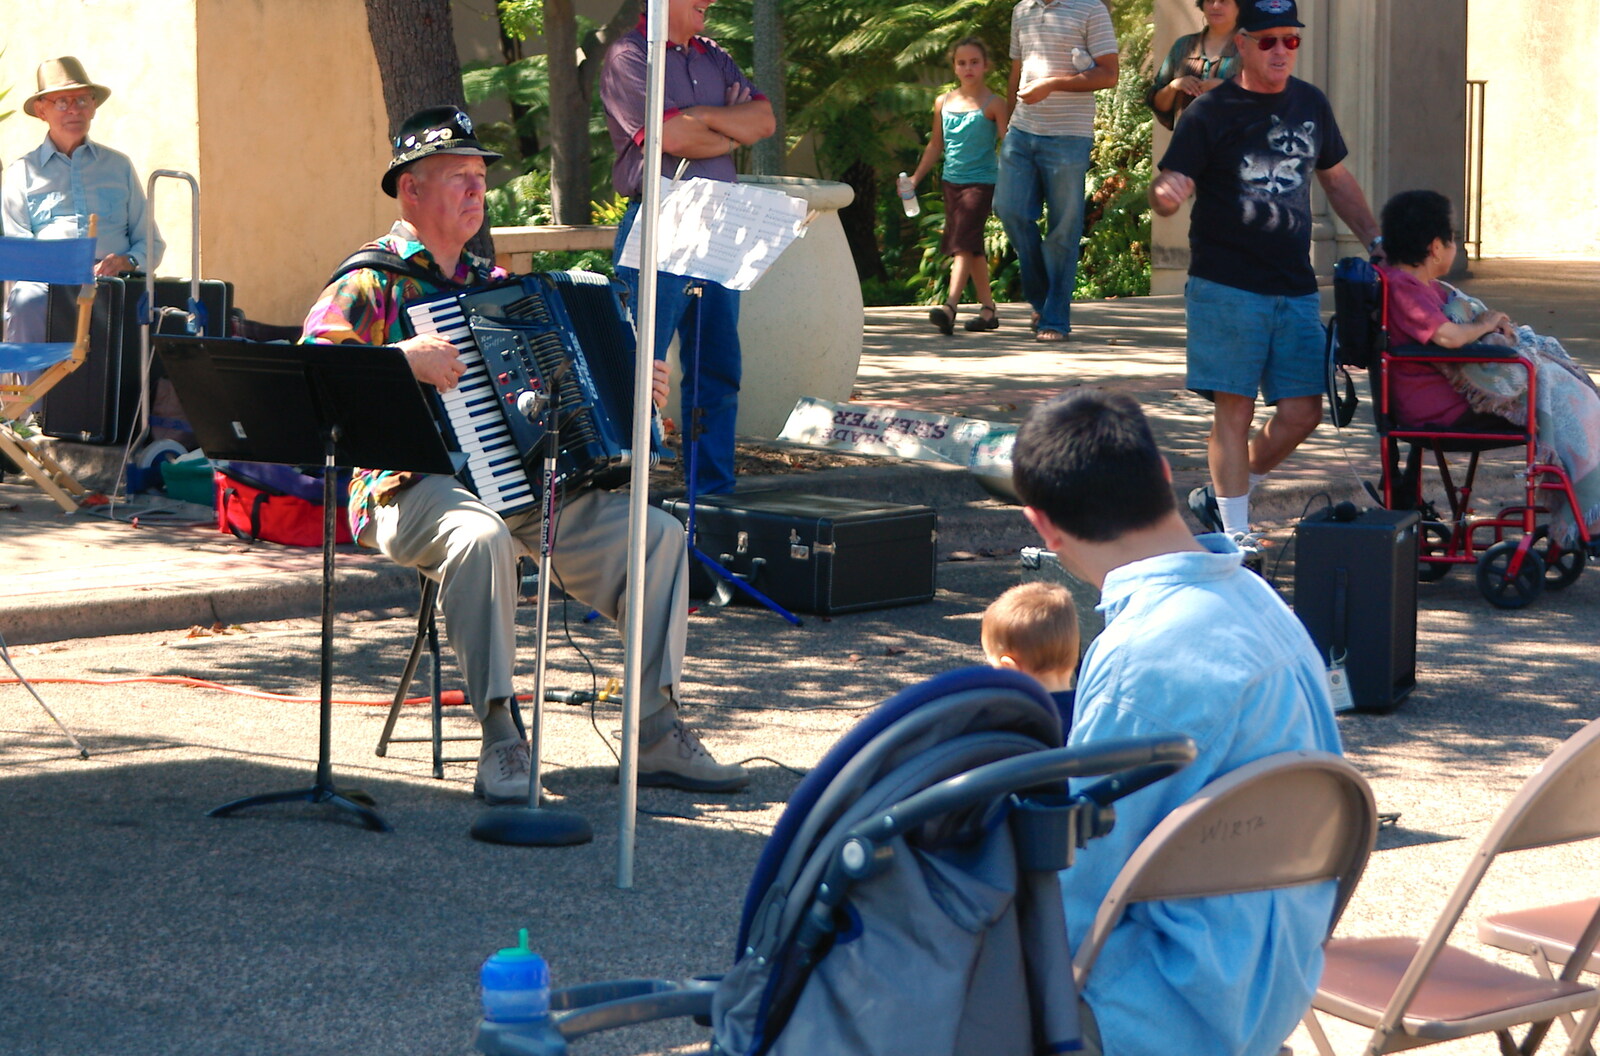 Scenes and People of Balboa Park, San Diego, California - 25th September 2005: A couple of people watch an accordion player